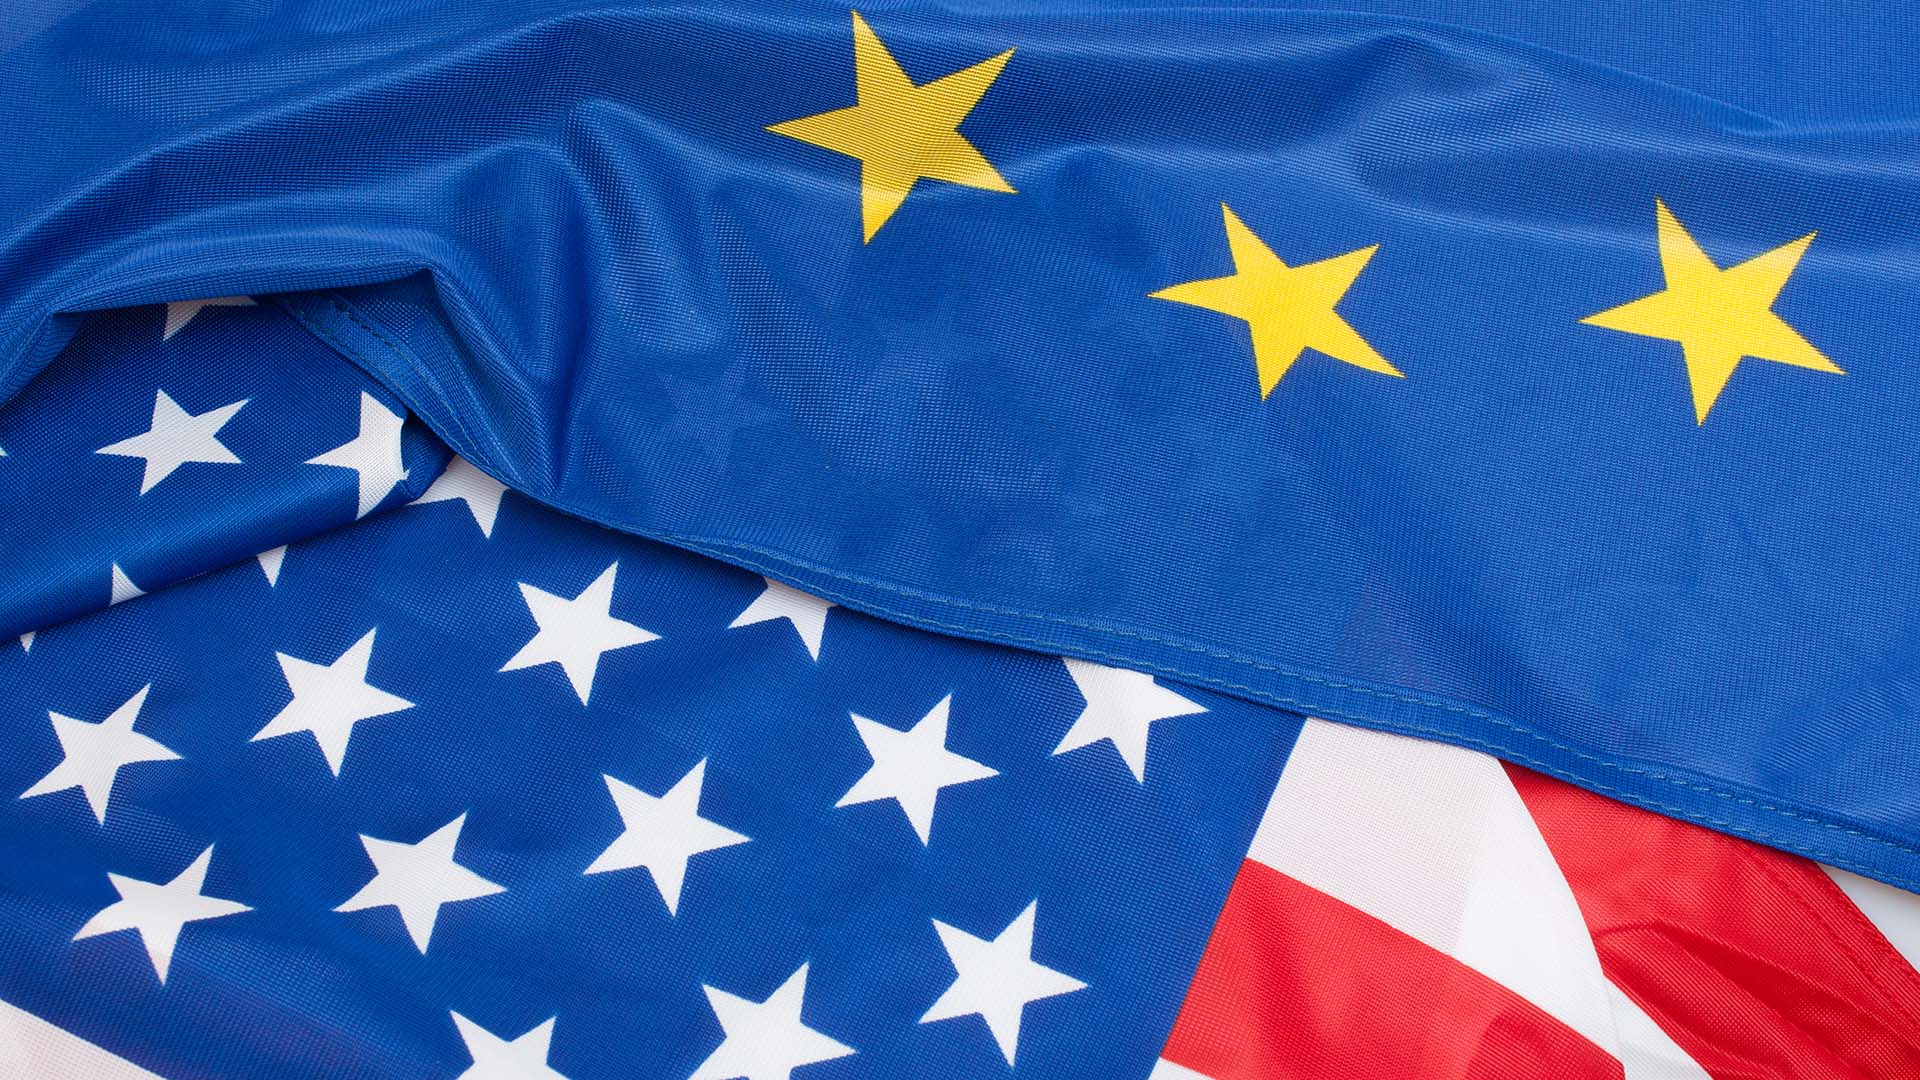 Overlay of the European Union and United States flags